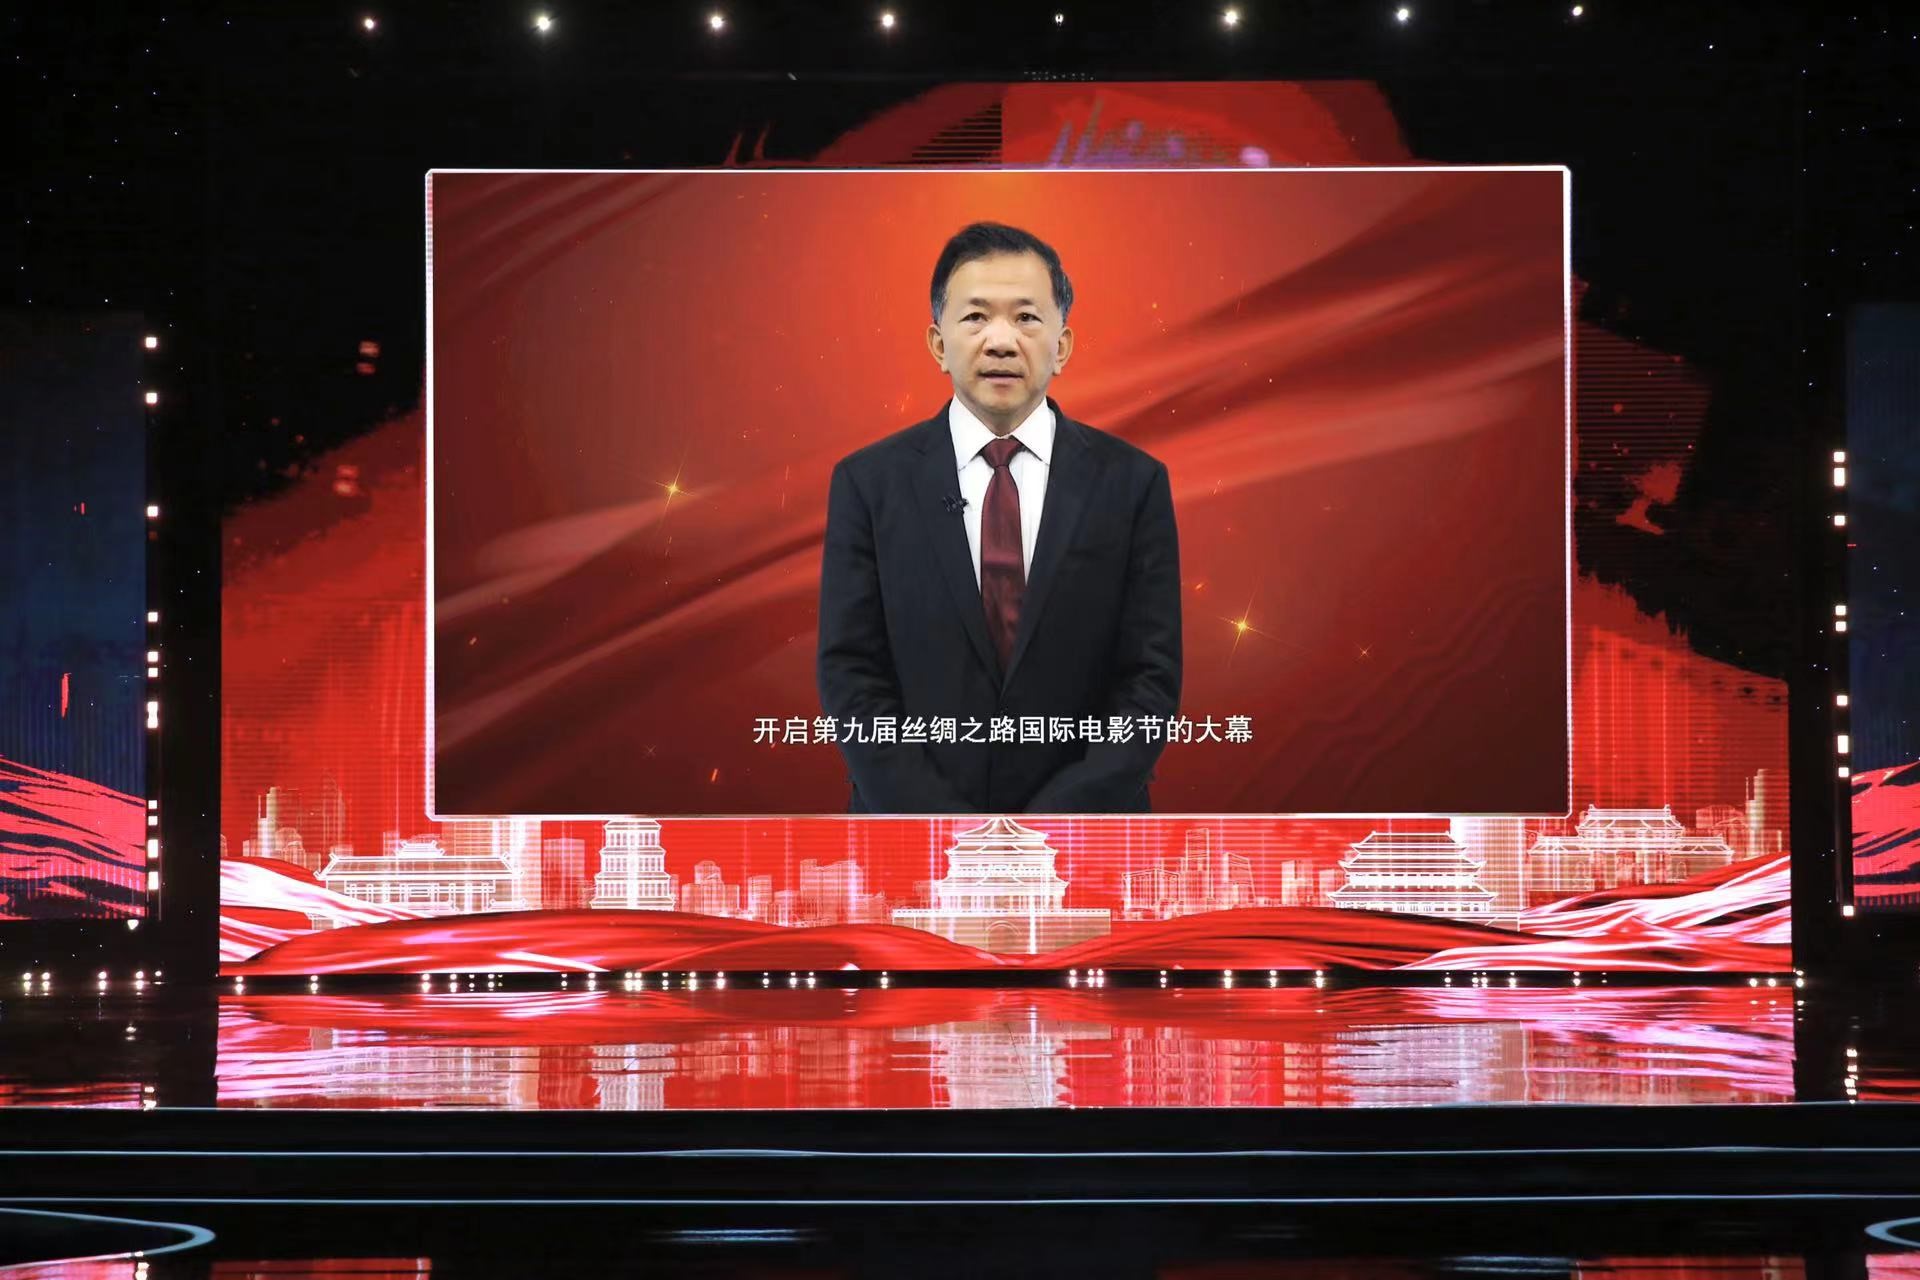 China Media Group President Shen Haixiong delivers a video address at the opening ceremony of the 9th SRIFF in Xi'an, Shaanxi, January 1, 2023. /CMG